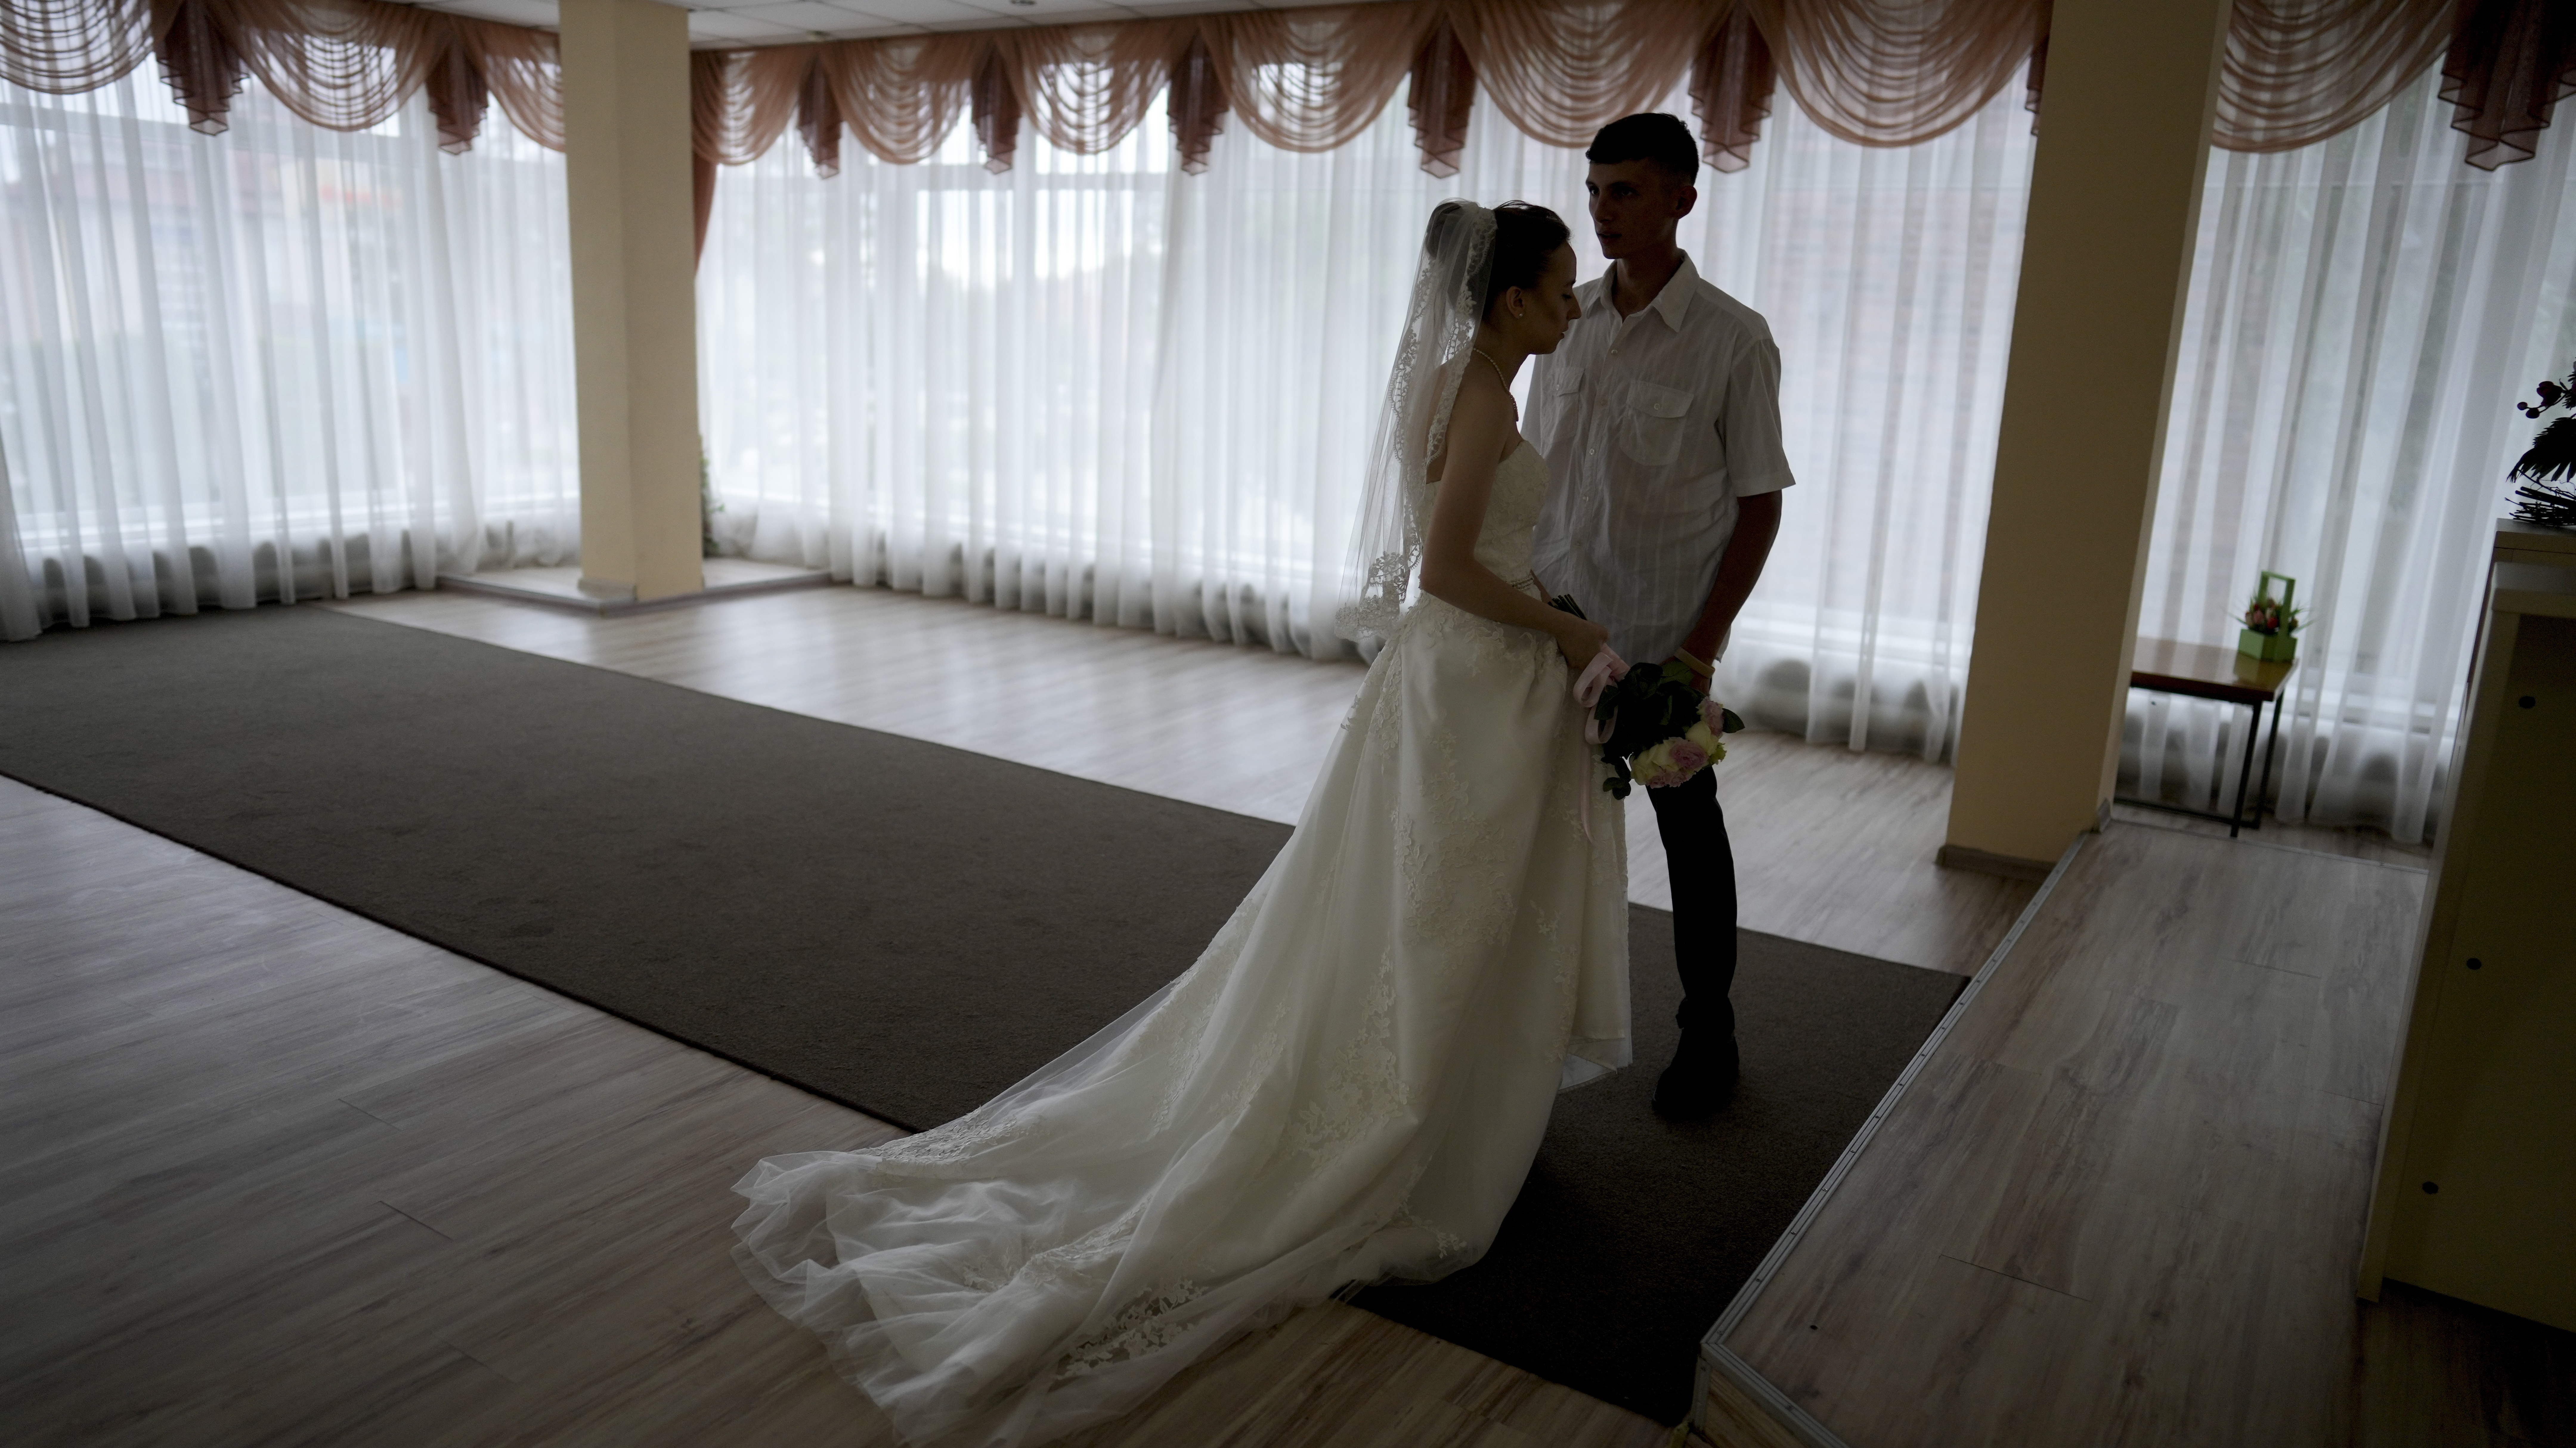 Yevhen Levchenko and Nadiia Prytula get married in Irpin, on the outskirts of Kyiv.